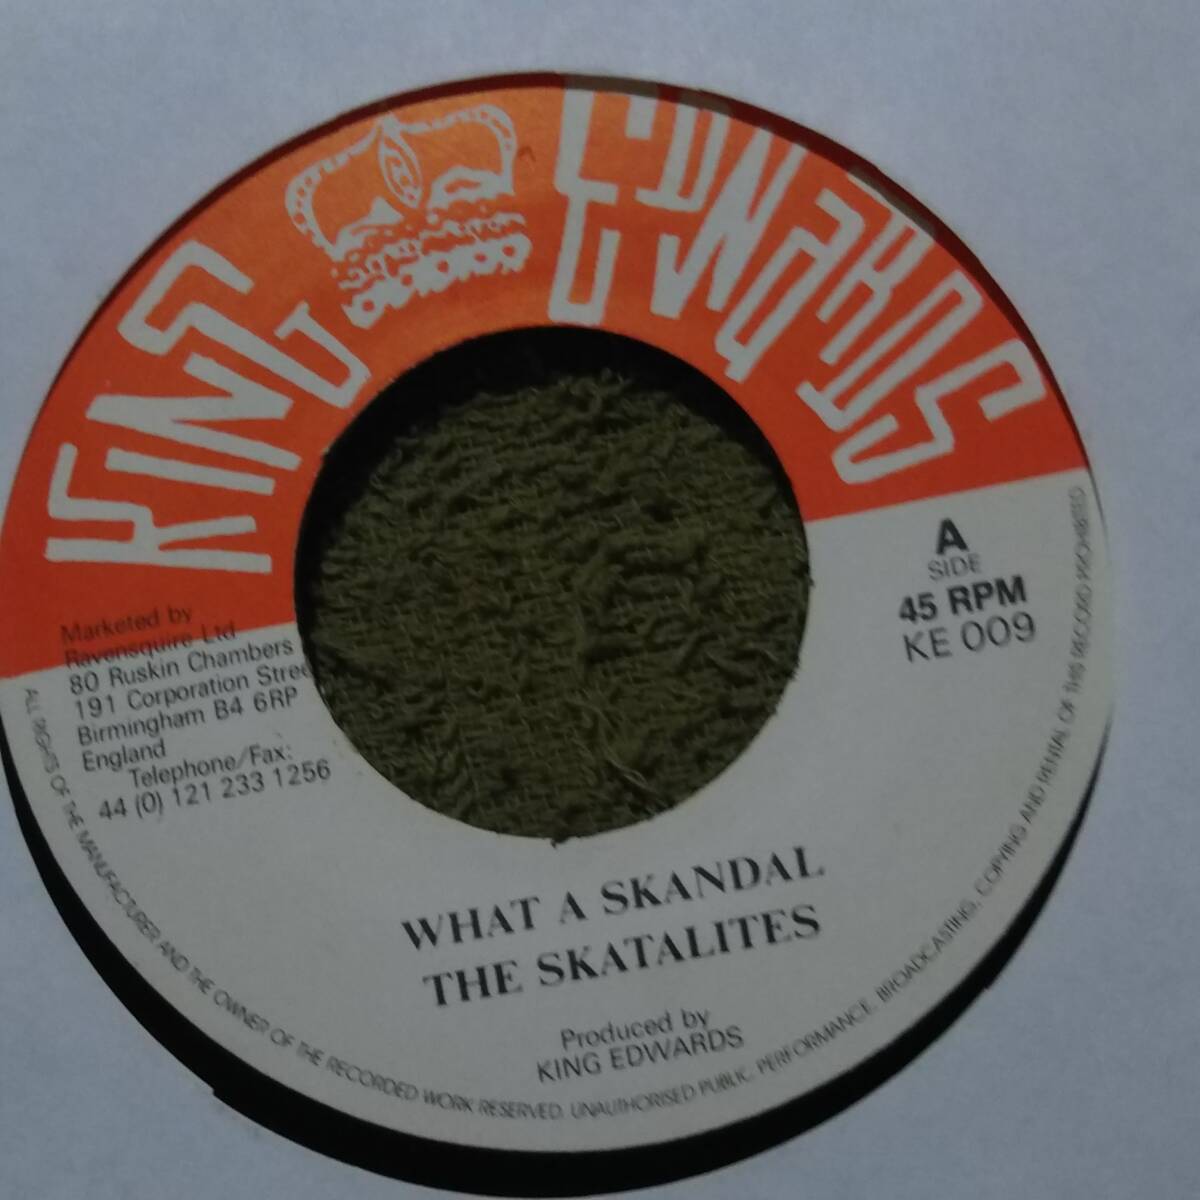 Wicked & Sweet Ska Music What A Skandal The Skatalites from King Edwards